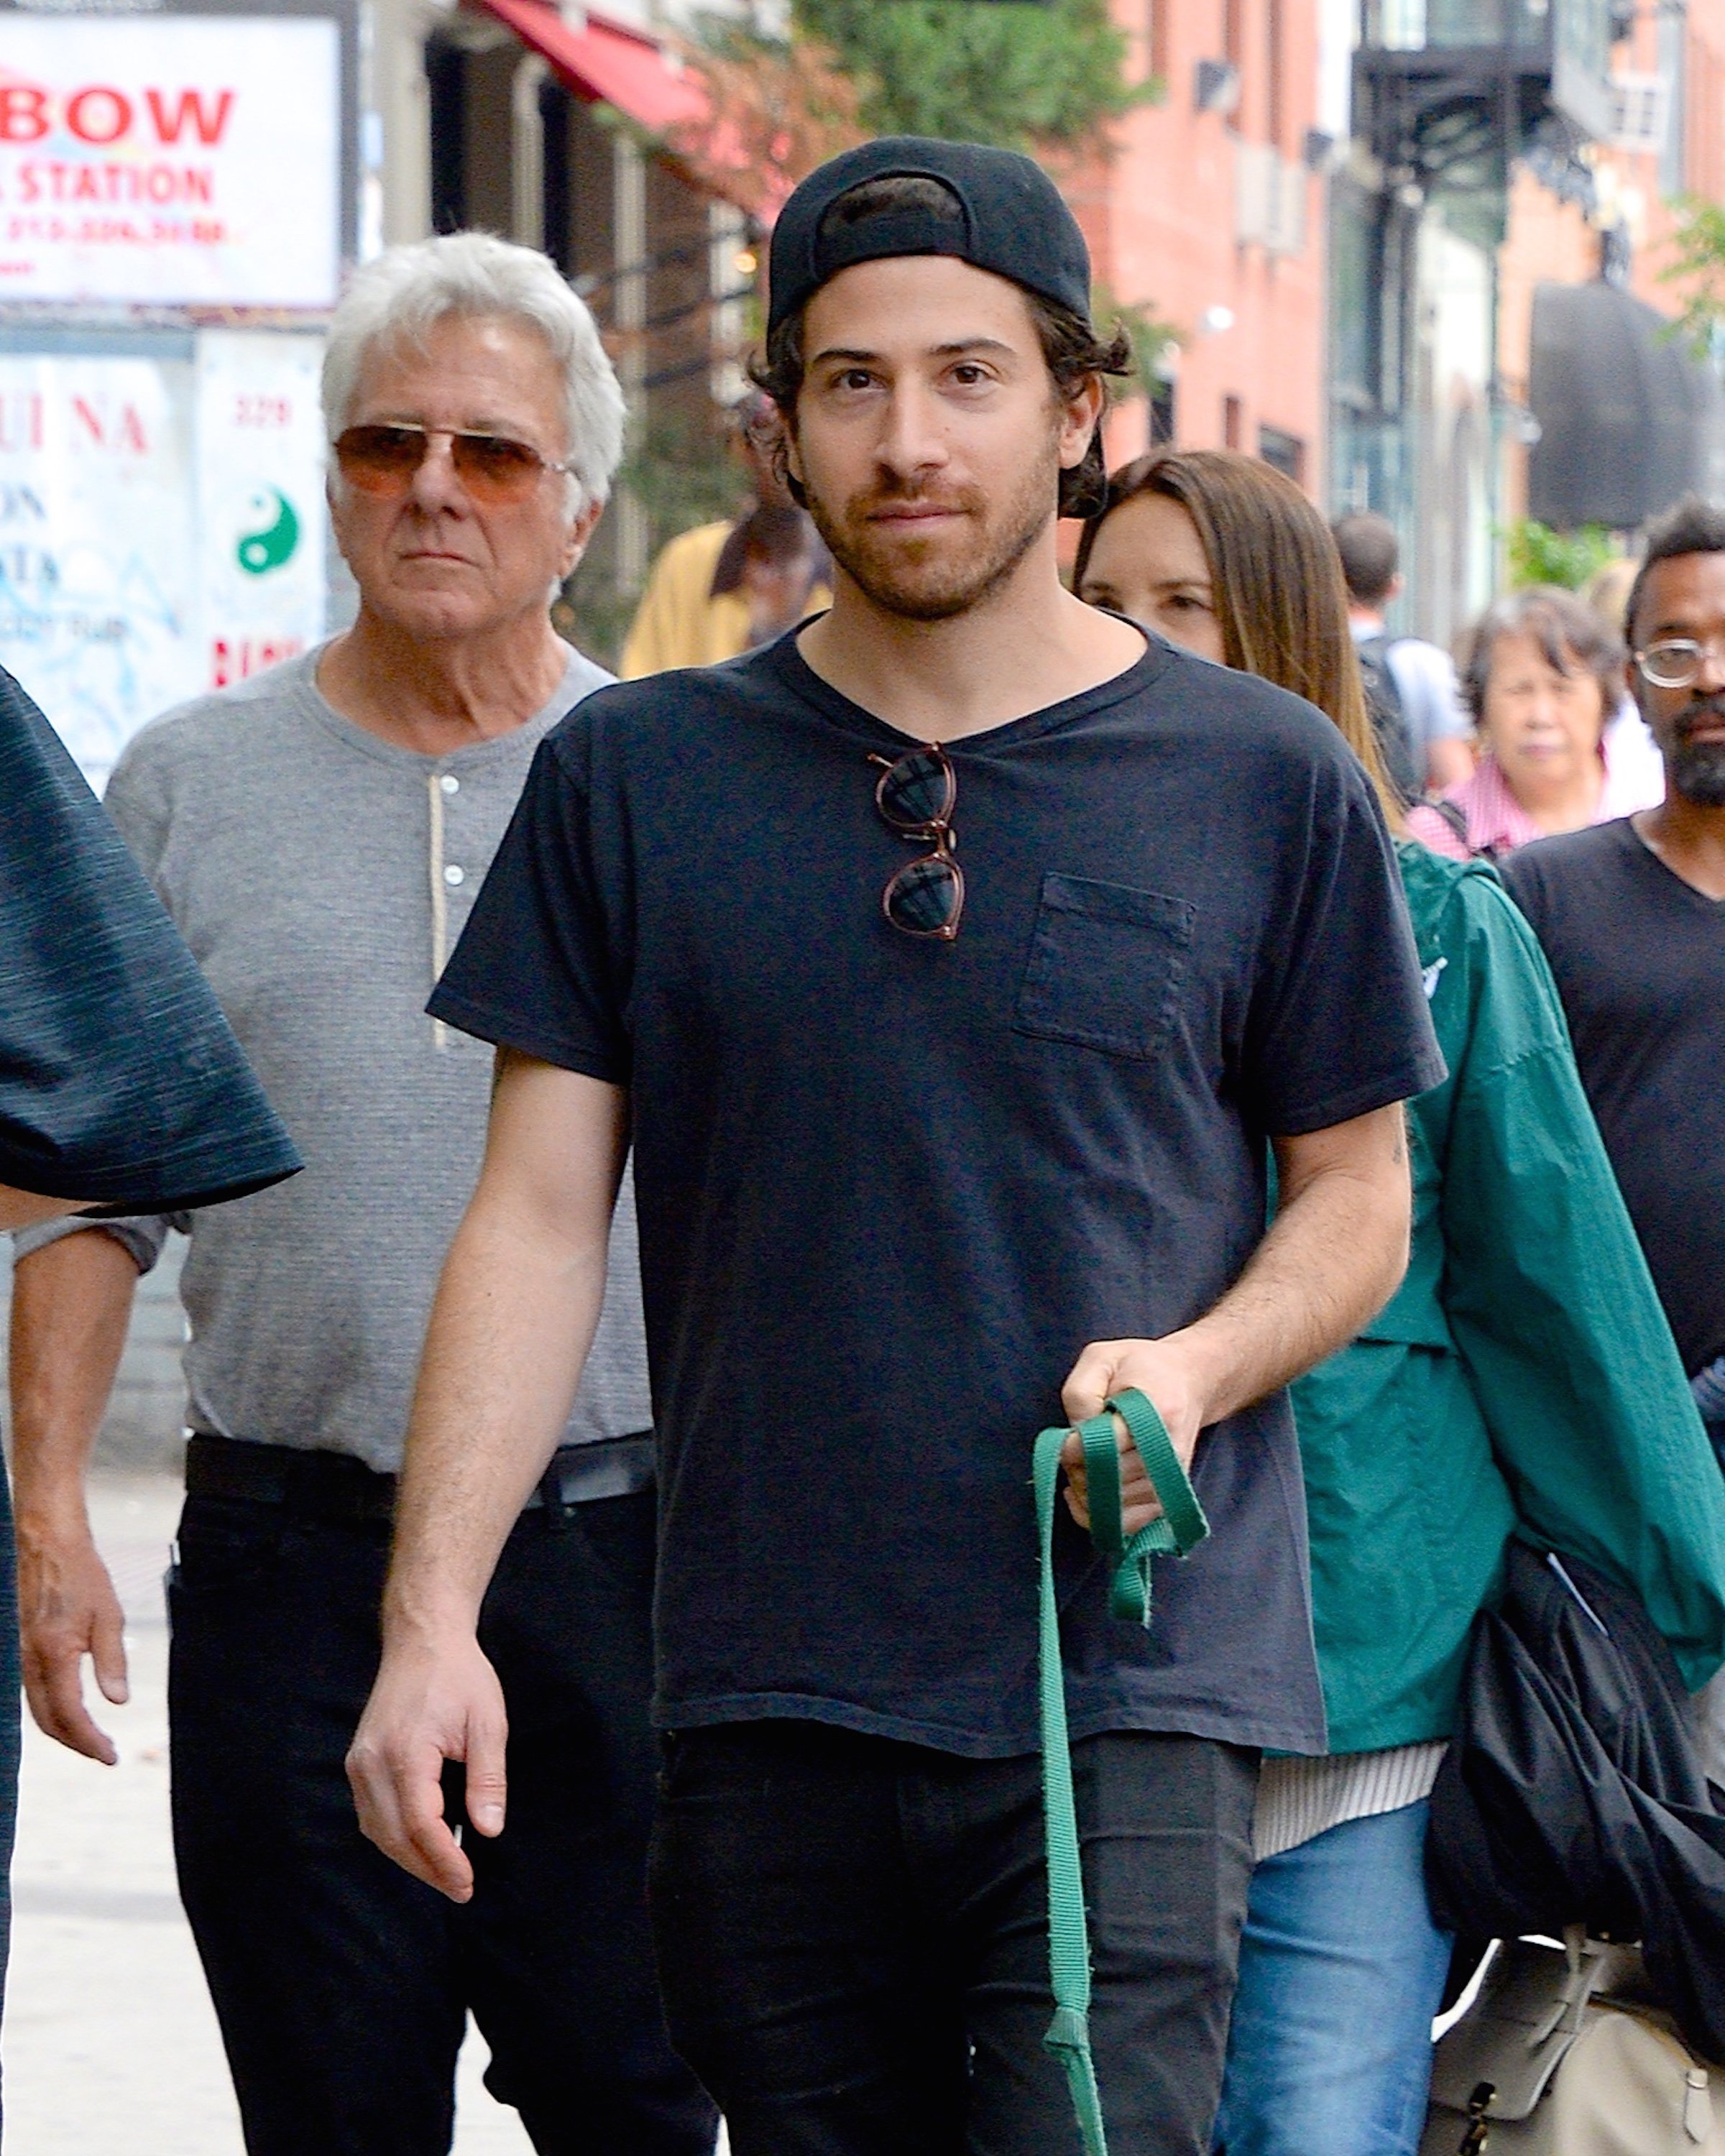 Dustin Hoffman, wife Lisa Hoffman and son Jake Hoffman seen out for a dog walk in Manhattan on June 13, 2018 in New York City. | Source: Getty Images